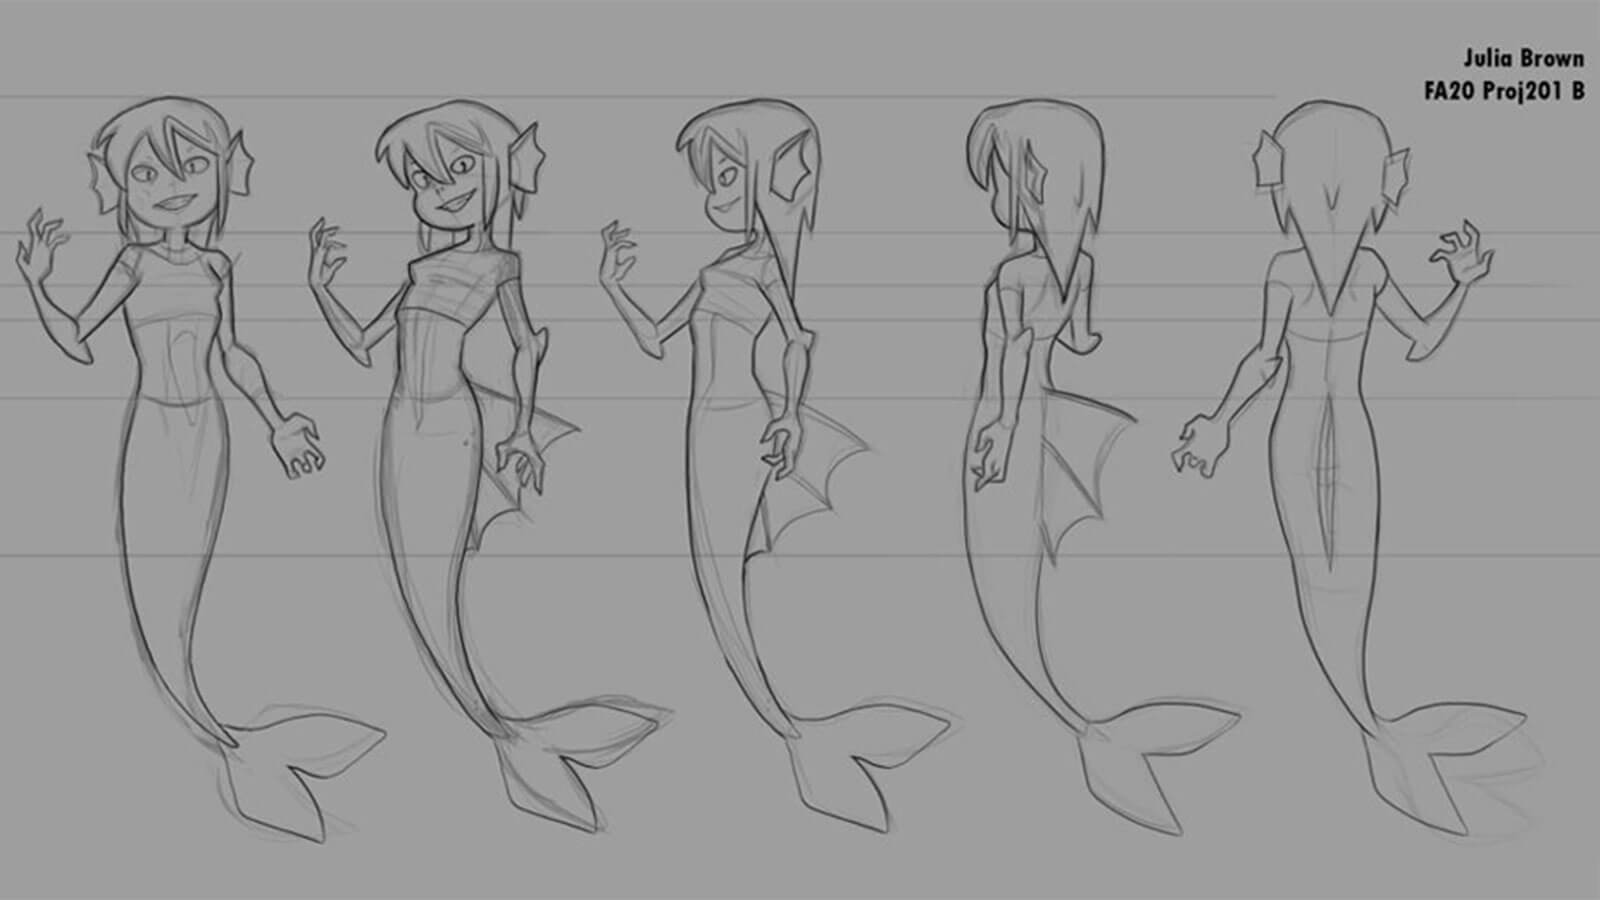 Mermaid character sketch drawn from five angles